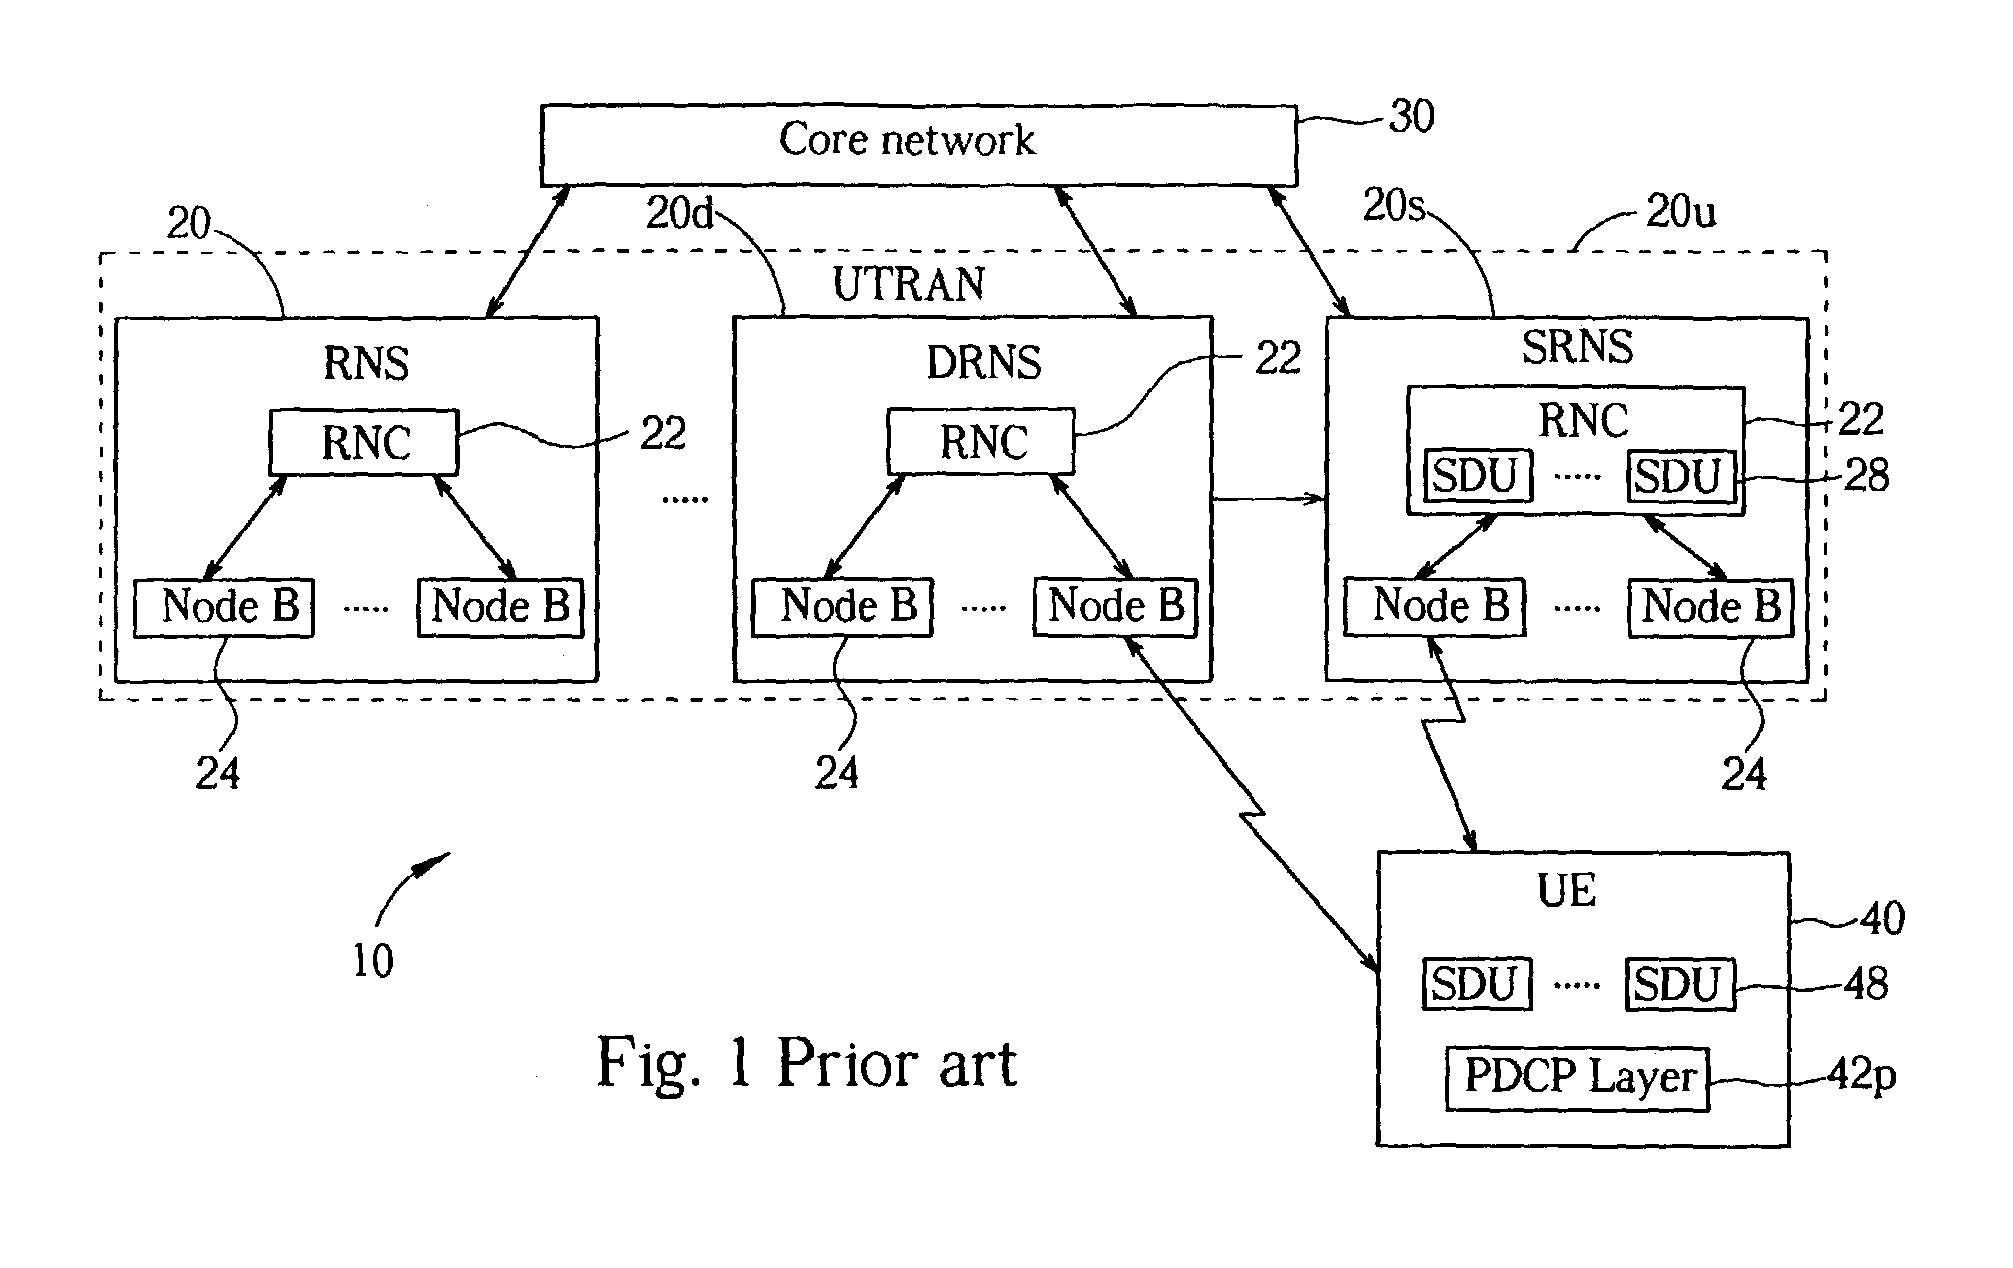 Method for determining triggering of a PDCP sequence number synchronization procedure